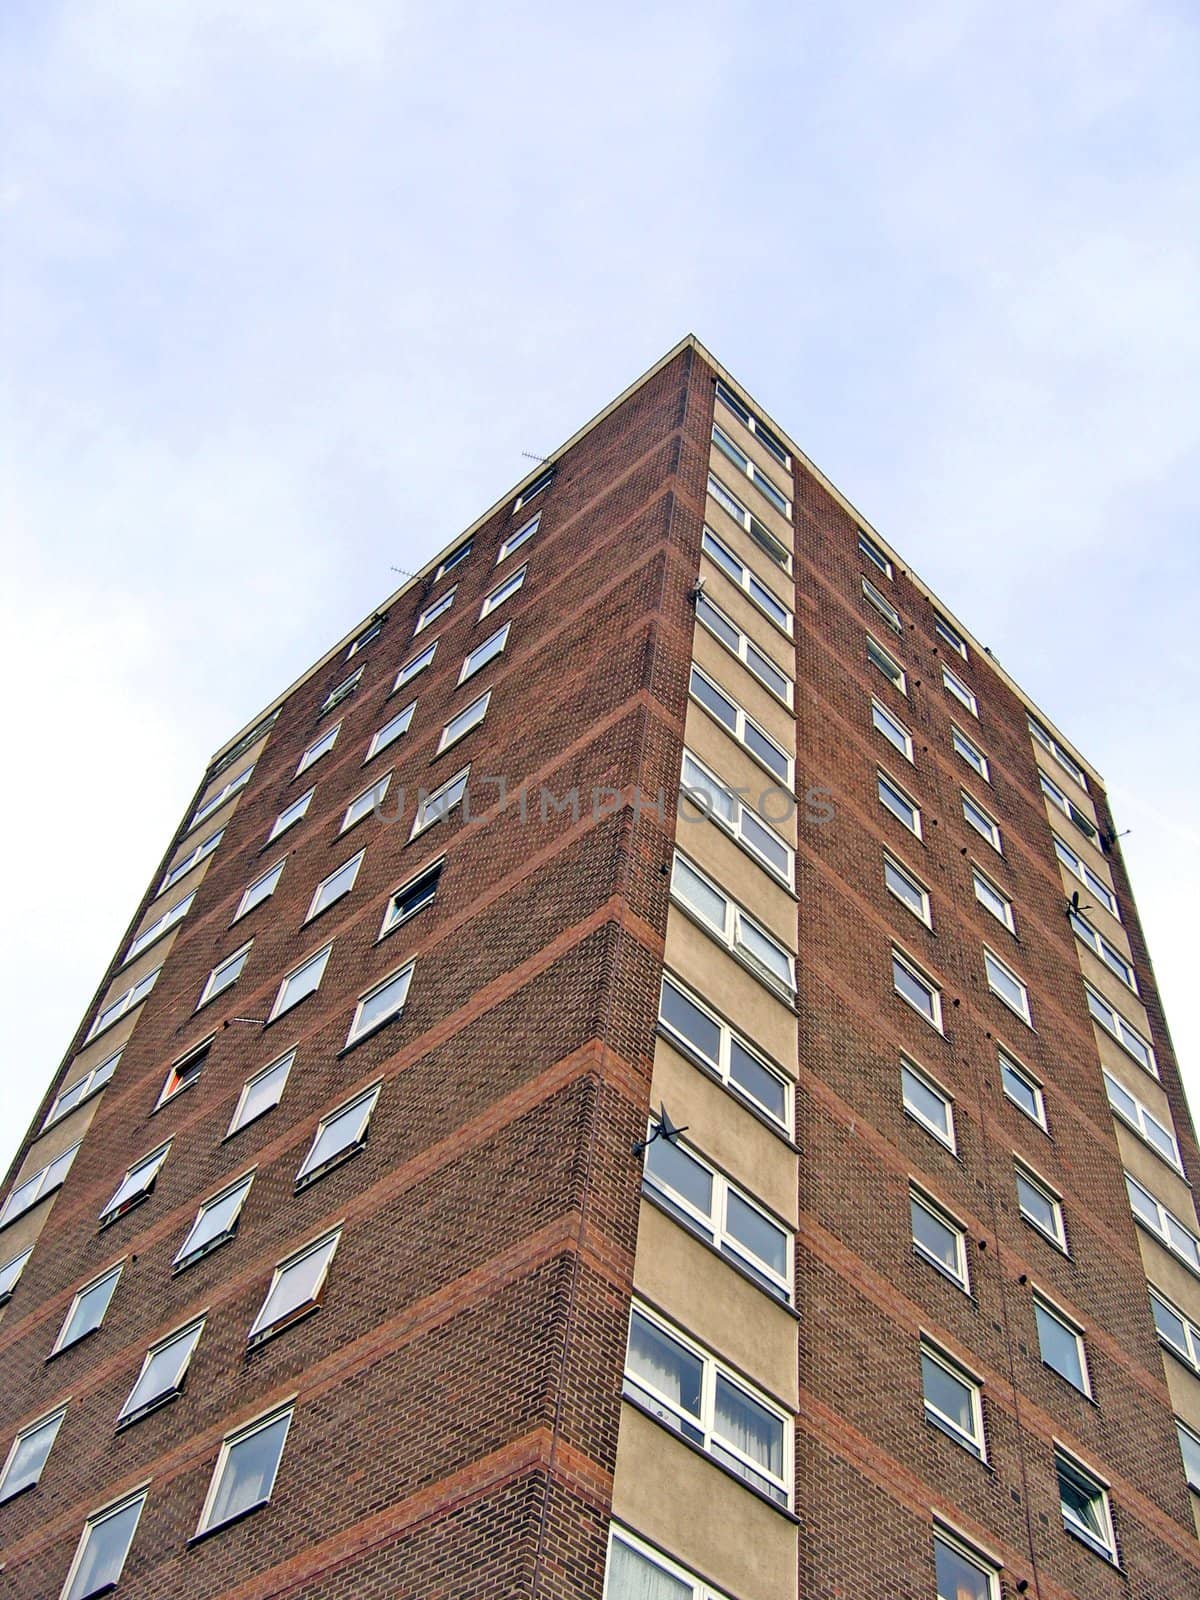 Residential Tower Block in Manchester, England